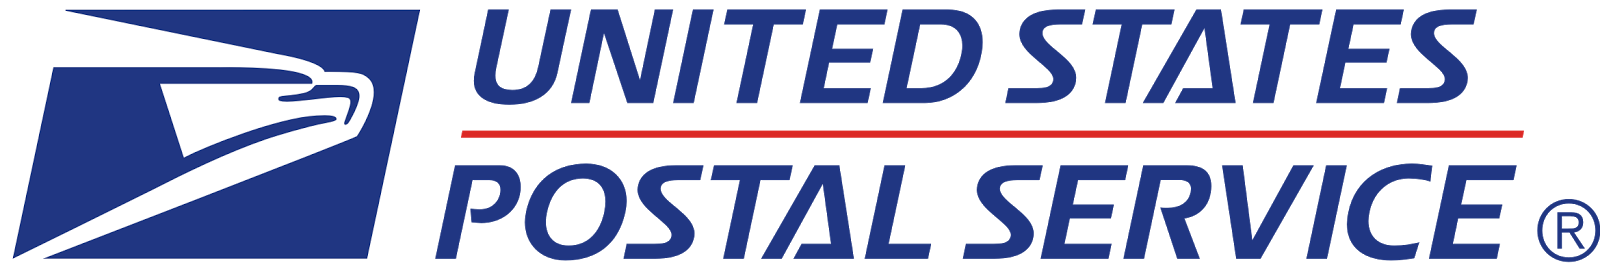 Usps Logo Vector At Collection Of Usps Logo Vector